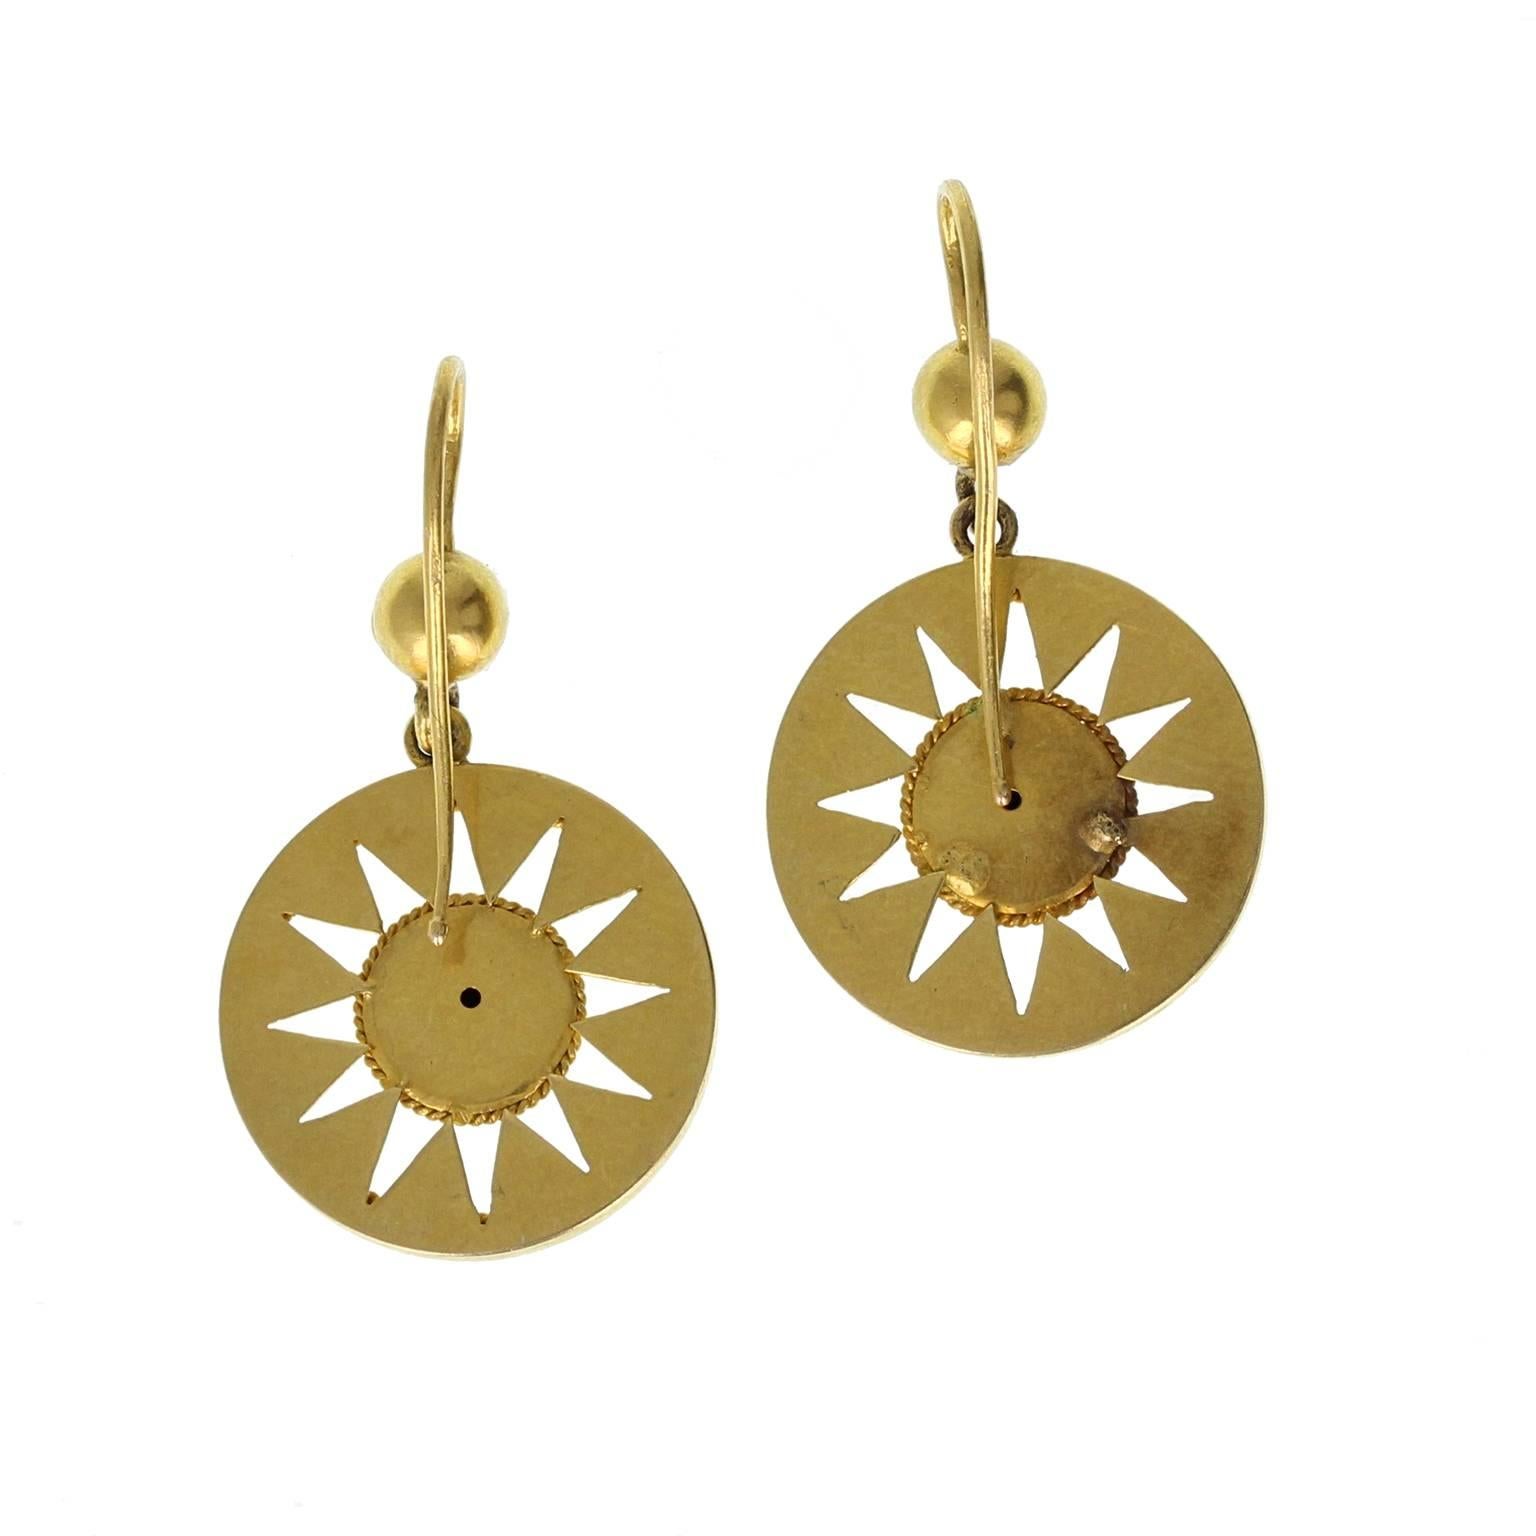 An exquisite pair of Etruscan style drop earrings in 15ct gold. The pierced starburst effect disks, decorated with rope-effect detailing hang from a gold bead, with shepherds hook style fixing for pierced ears.
 
Setting
Tests as 15ct gold
